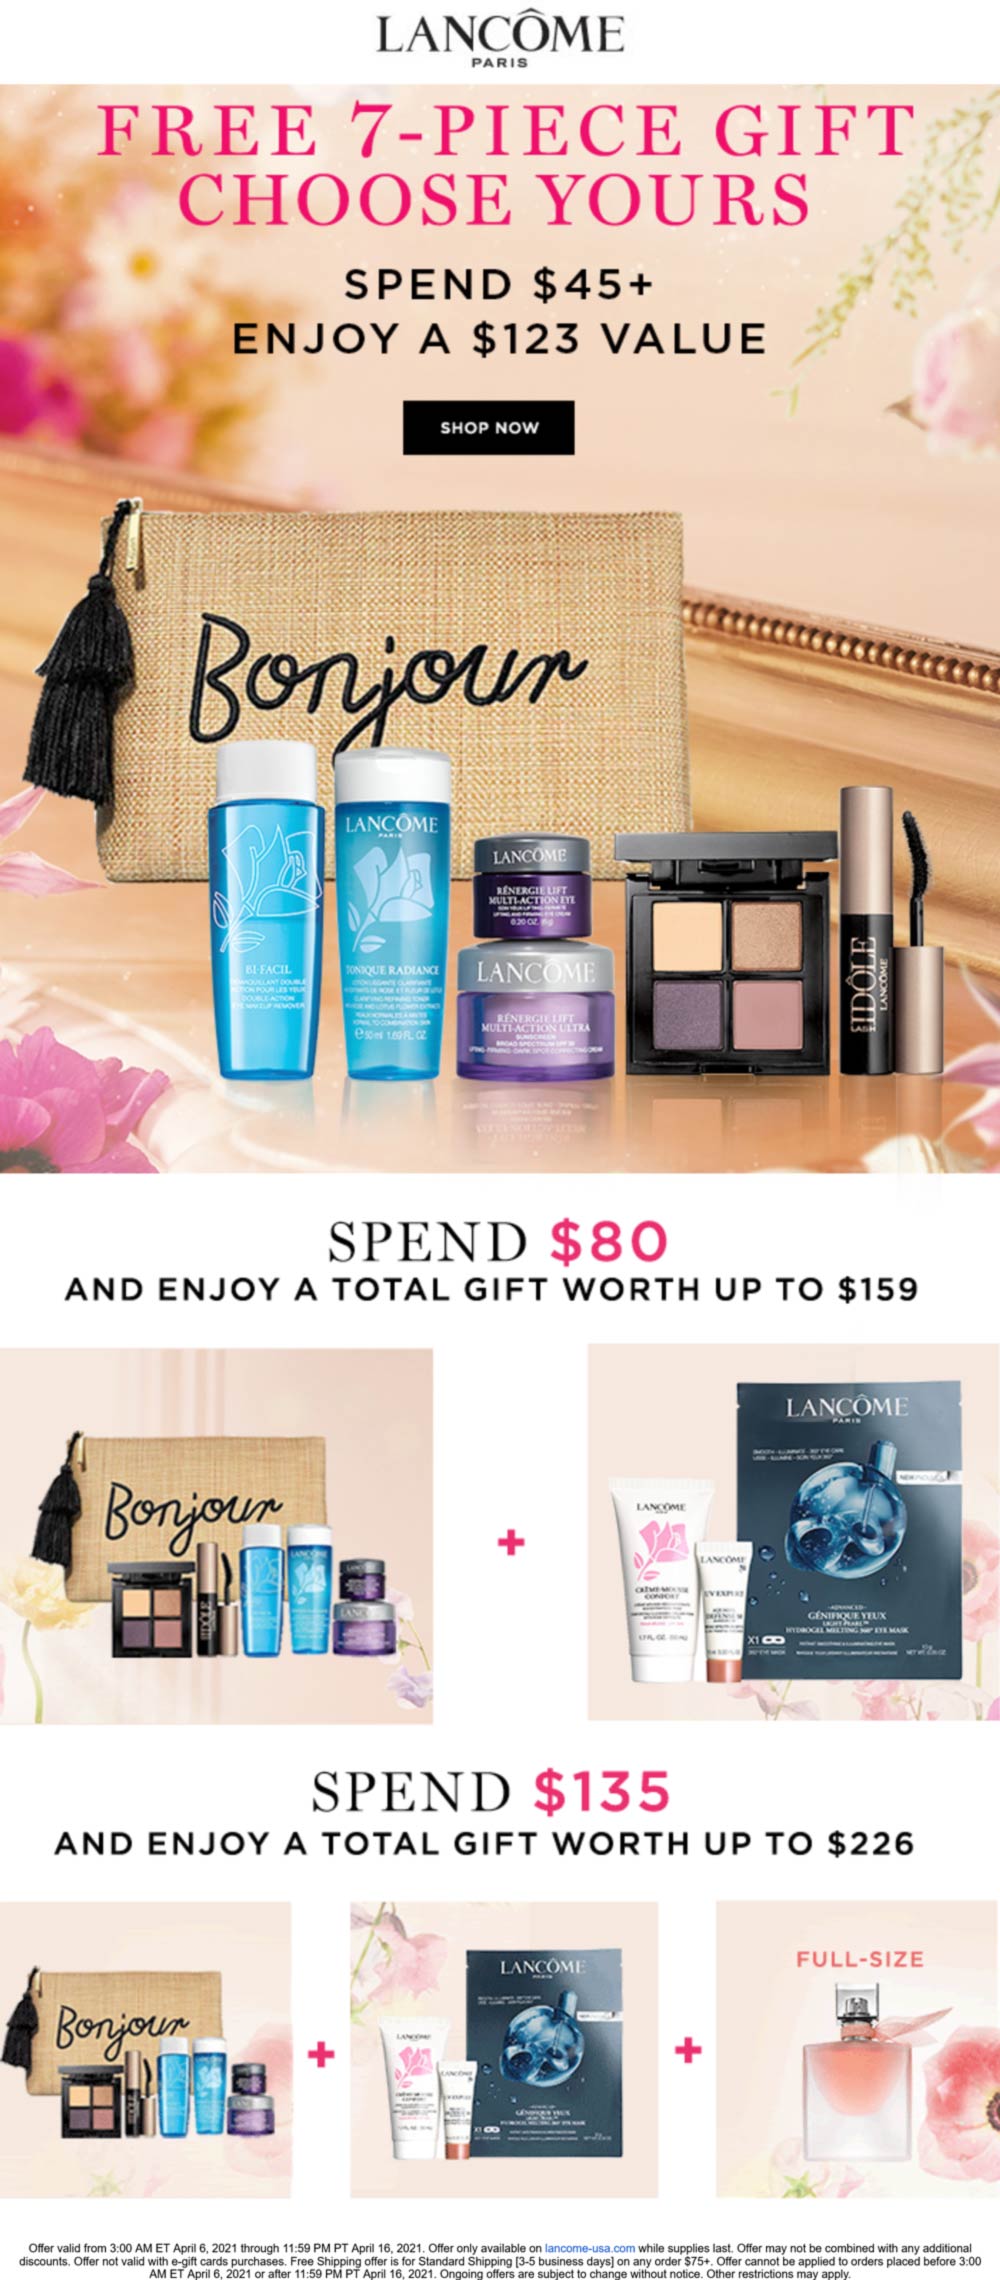 Lancome stores Coupon  7pc $123 set free with $45 spent & more online at Lancome #lancome 